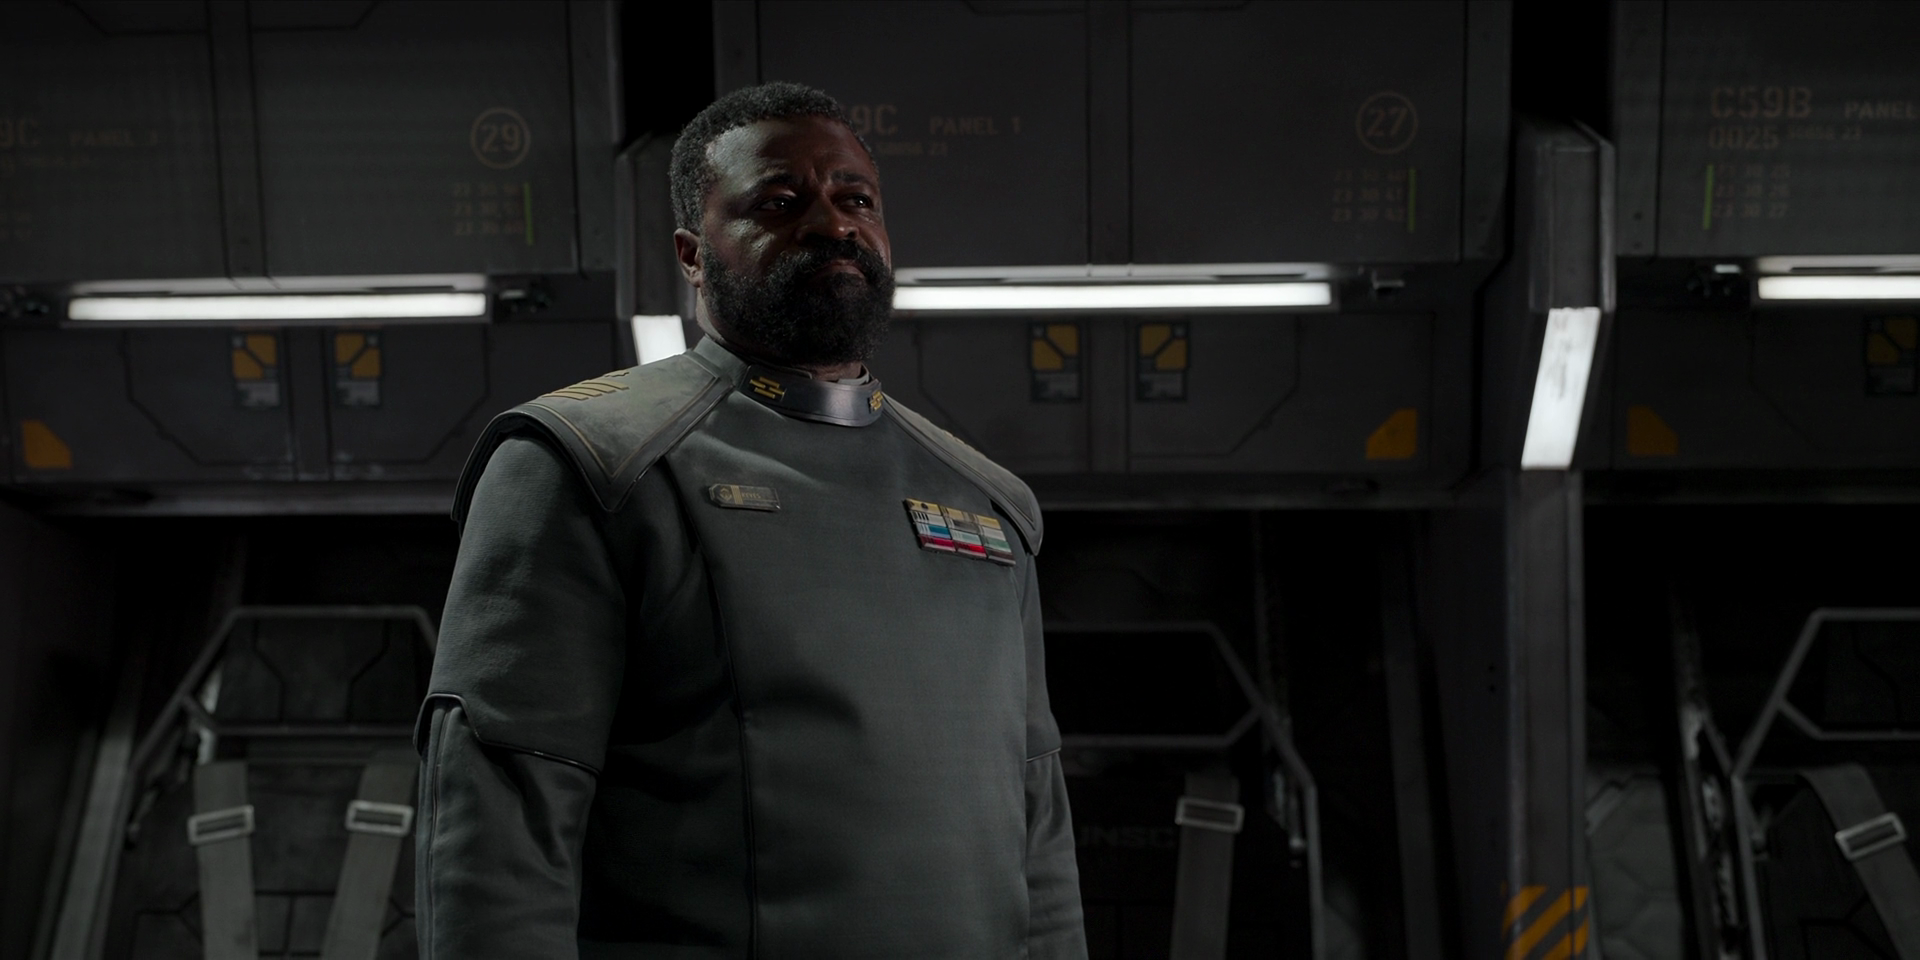 Captain Keyes, a Black man with a beard wearing a grey navy tunic, stands in a military spacecraft's passenger bay.